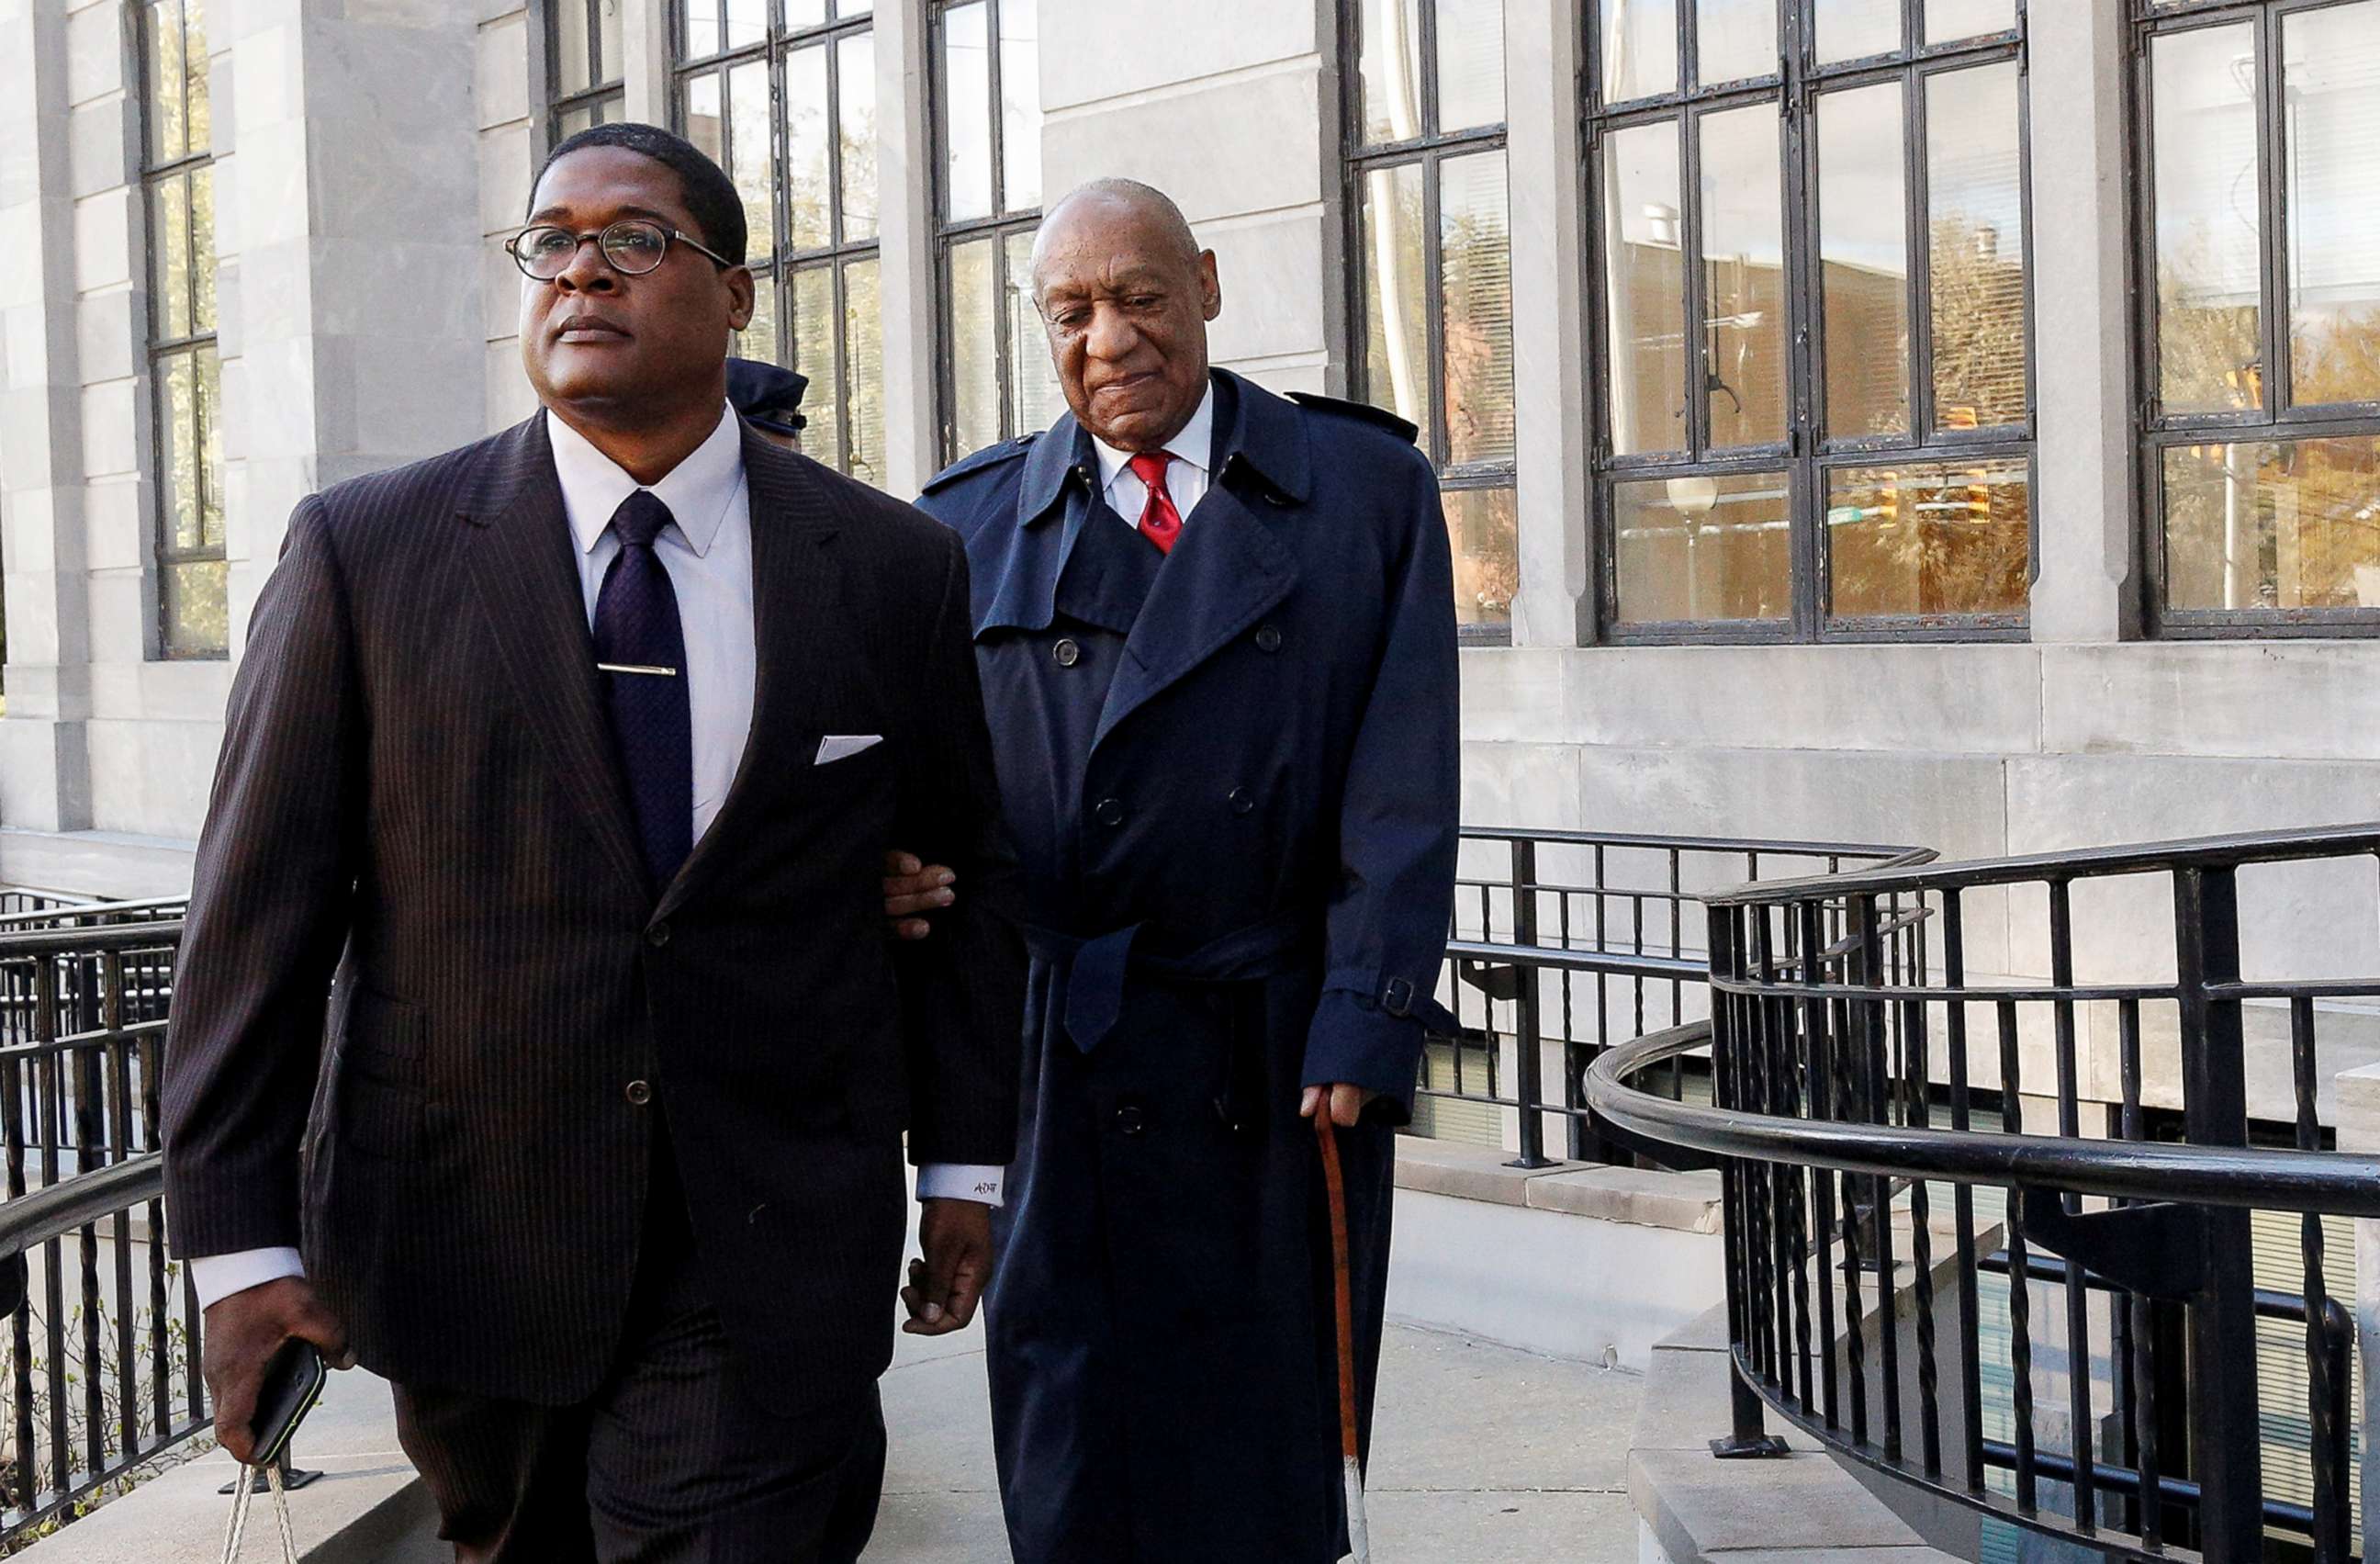 PHOTO: Actor and comedian Bill Cosby arrives with his spokesman Andrew Wyatt for deliberations at his sexual assault retrial at the Montgomery County Courthouse in Norristown, Pa., April 26, 2018.